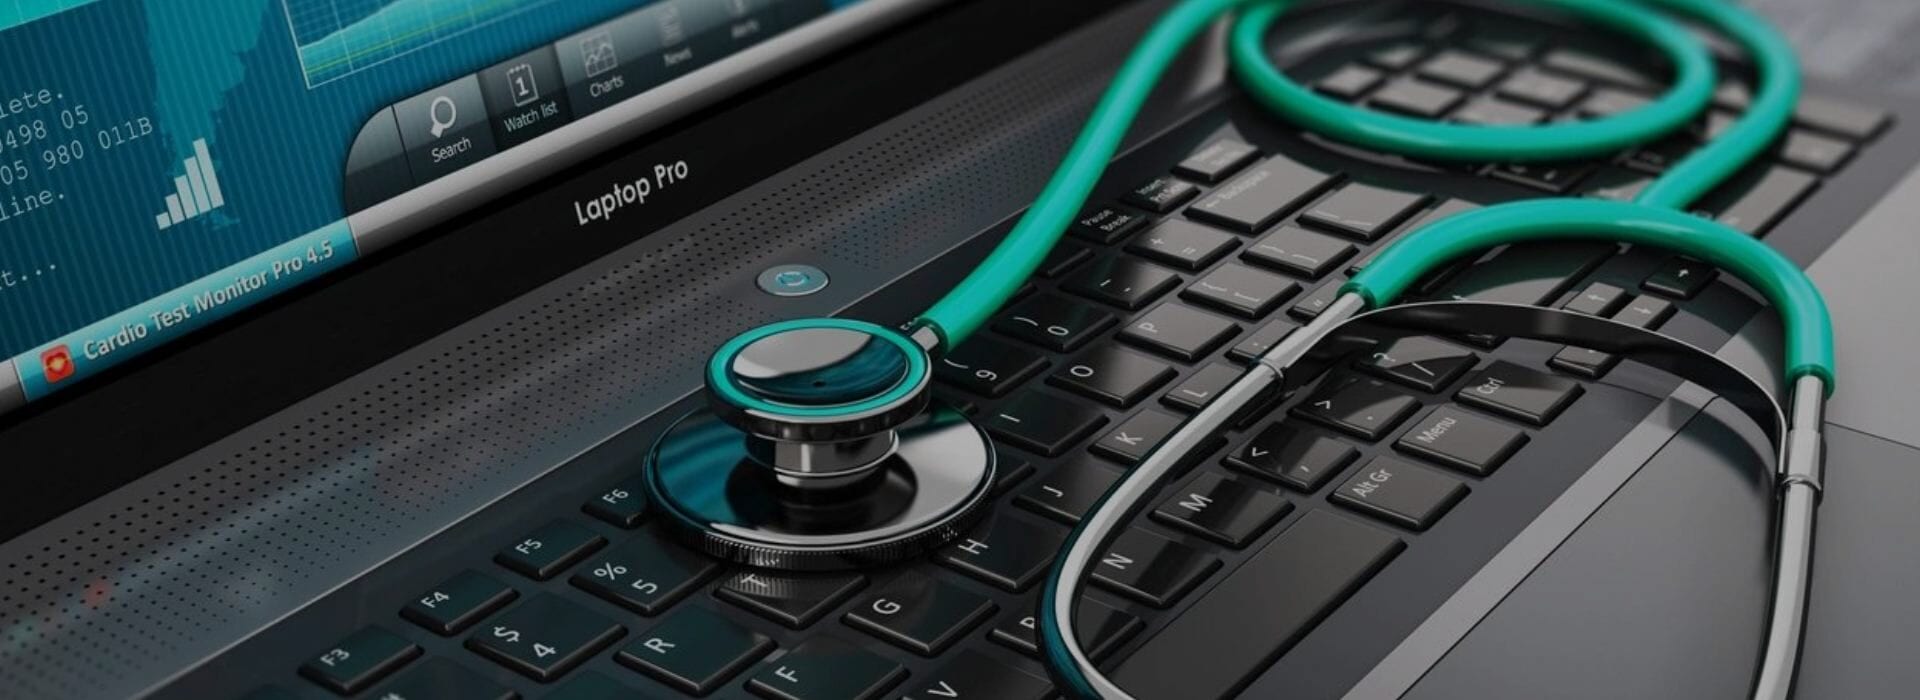 A stethoscope is sitting on top of a laptop.